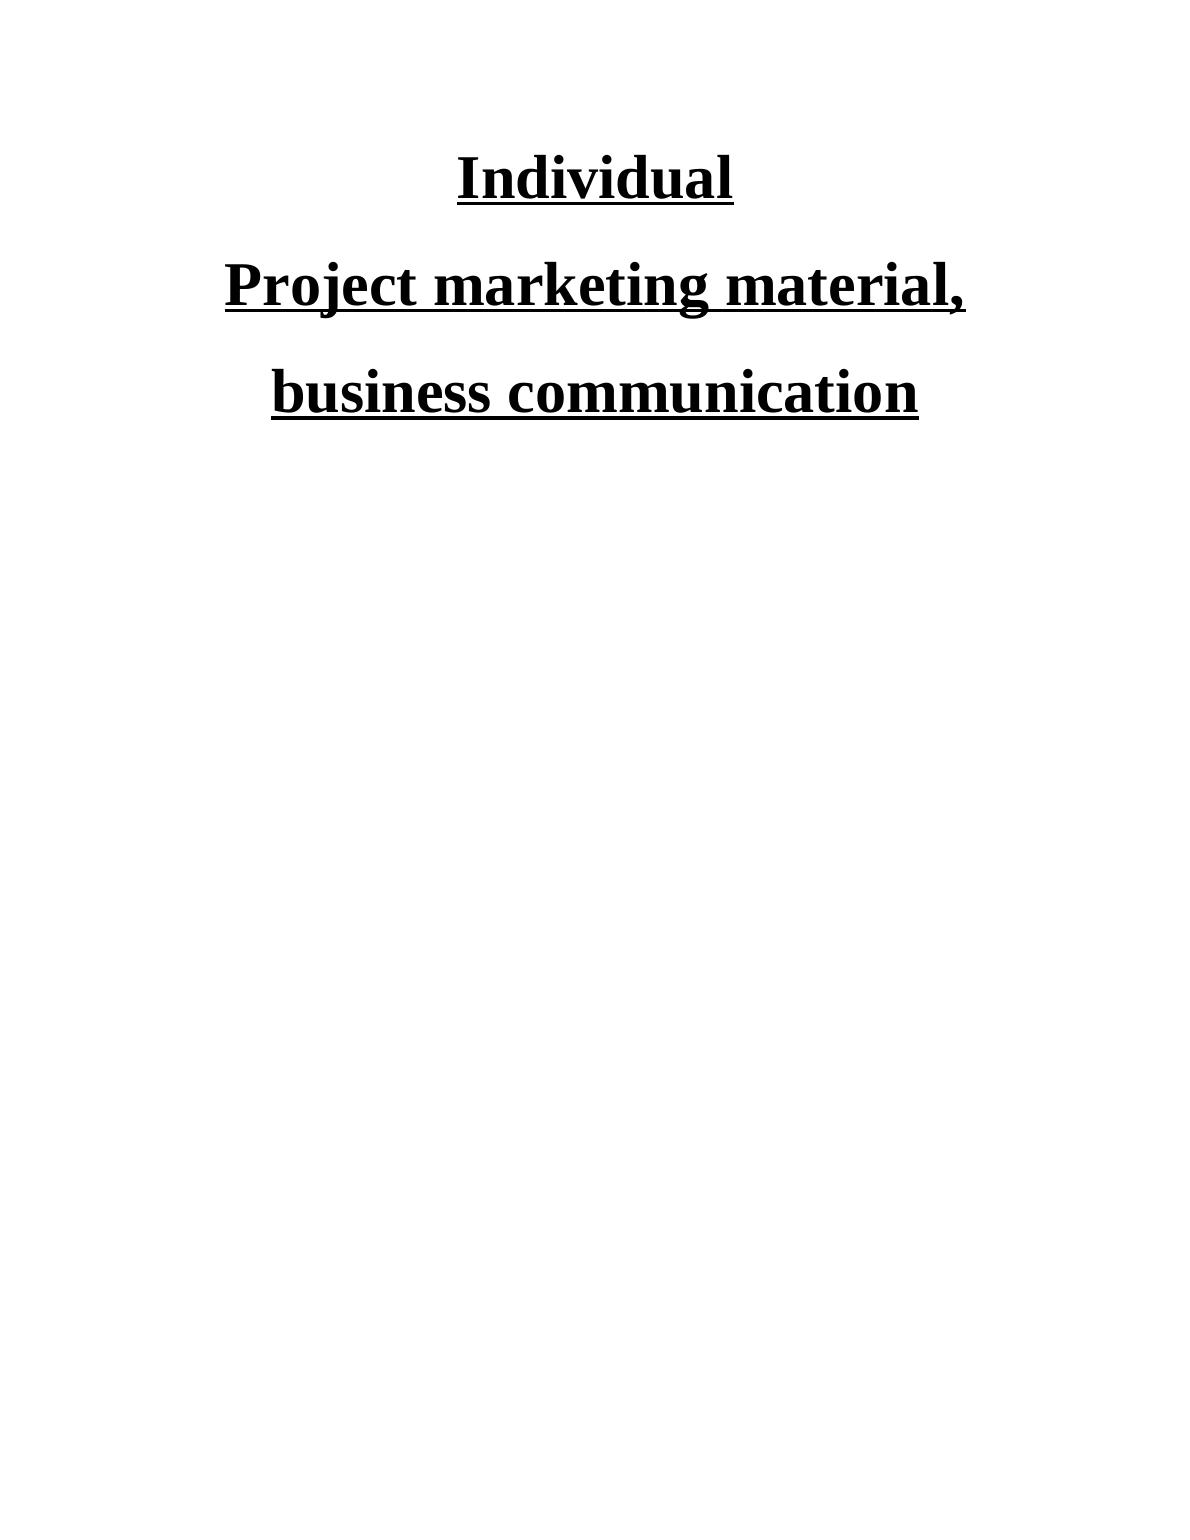 Business Communication: Sample Assignment_1